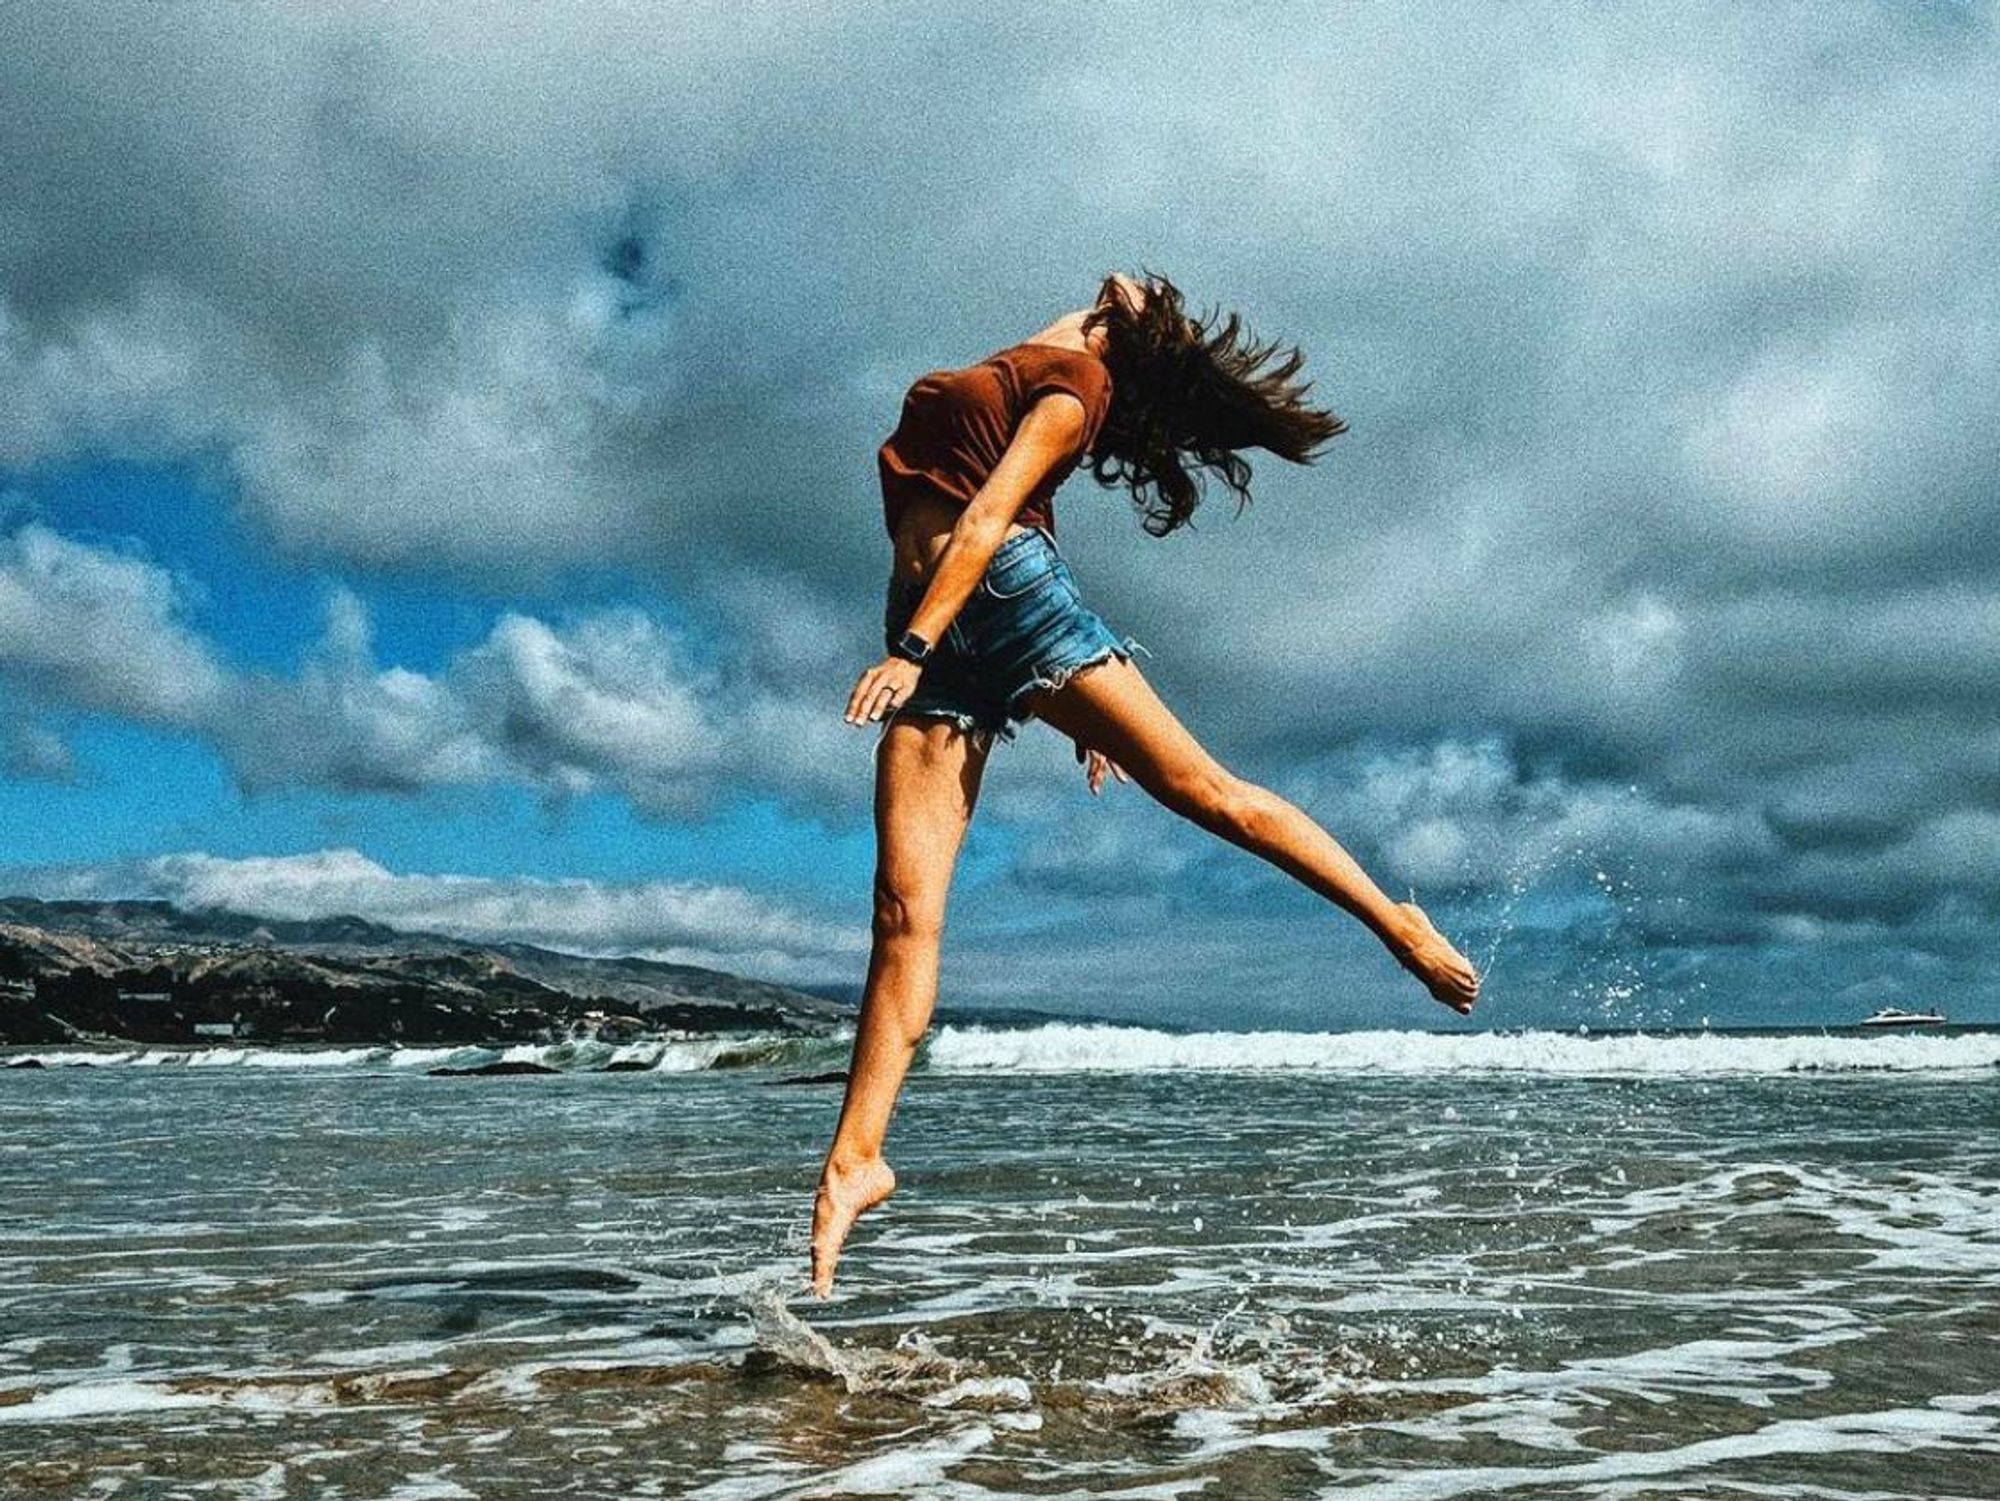 Daniela Ruah captured in a dramatic mid-leap as she kicks out from the surf on a beach with a clouded sky above.